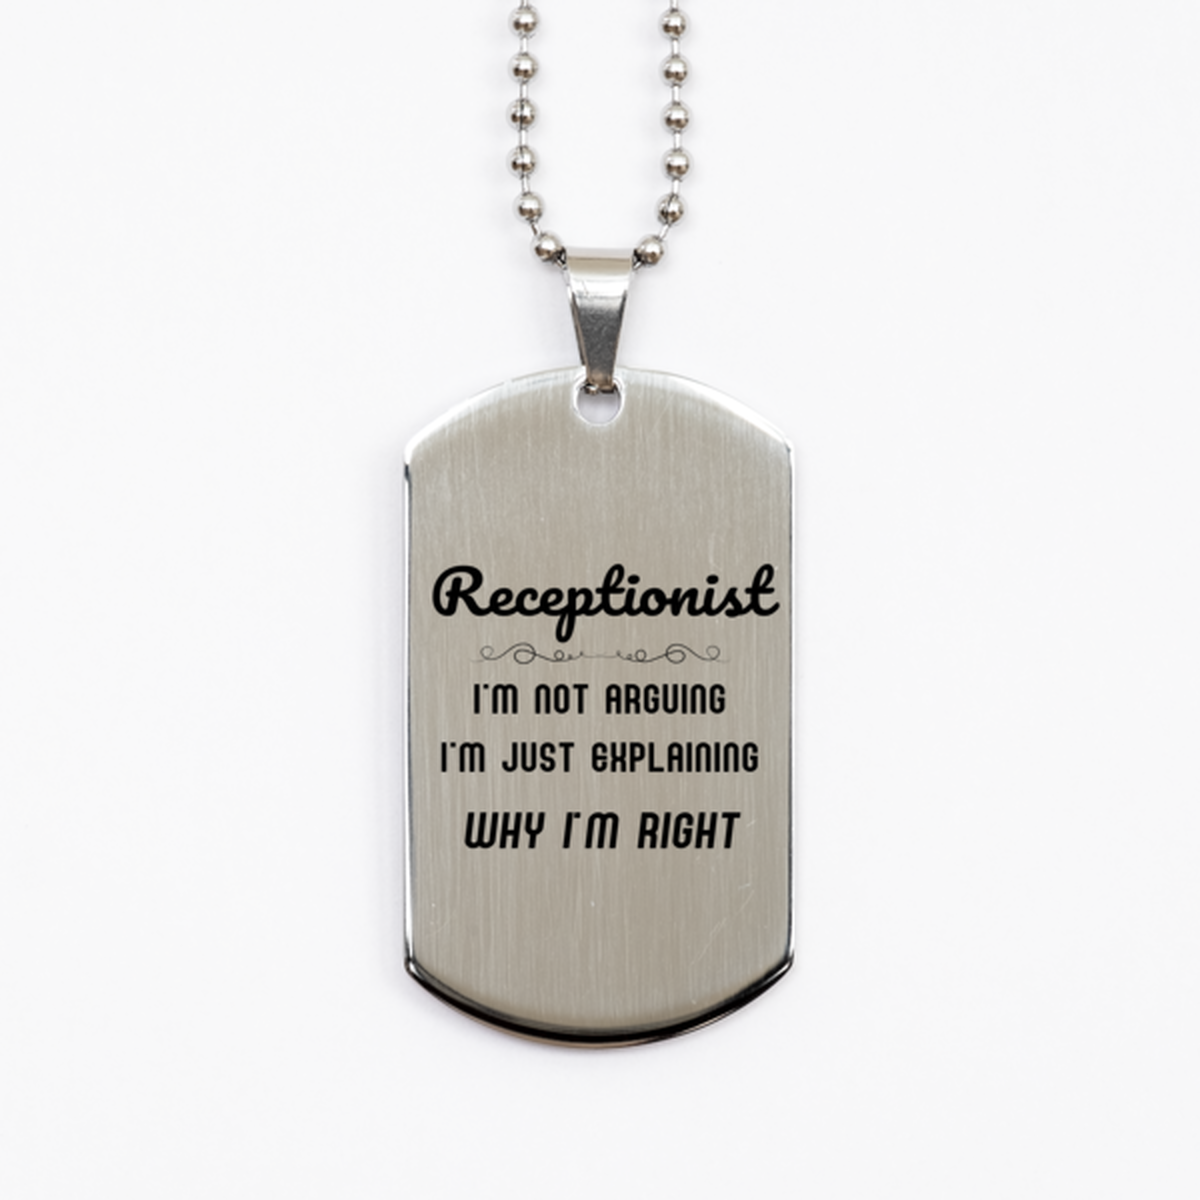 Receptionist I'm not Arguing. I'm Just Explaining Why I'm RIGHT Silver Dog Tag, Funny Saying Quote Receptionist Gifts For Receptionist Graduation Birthday Christmas Gifts for Men Women Coworker